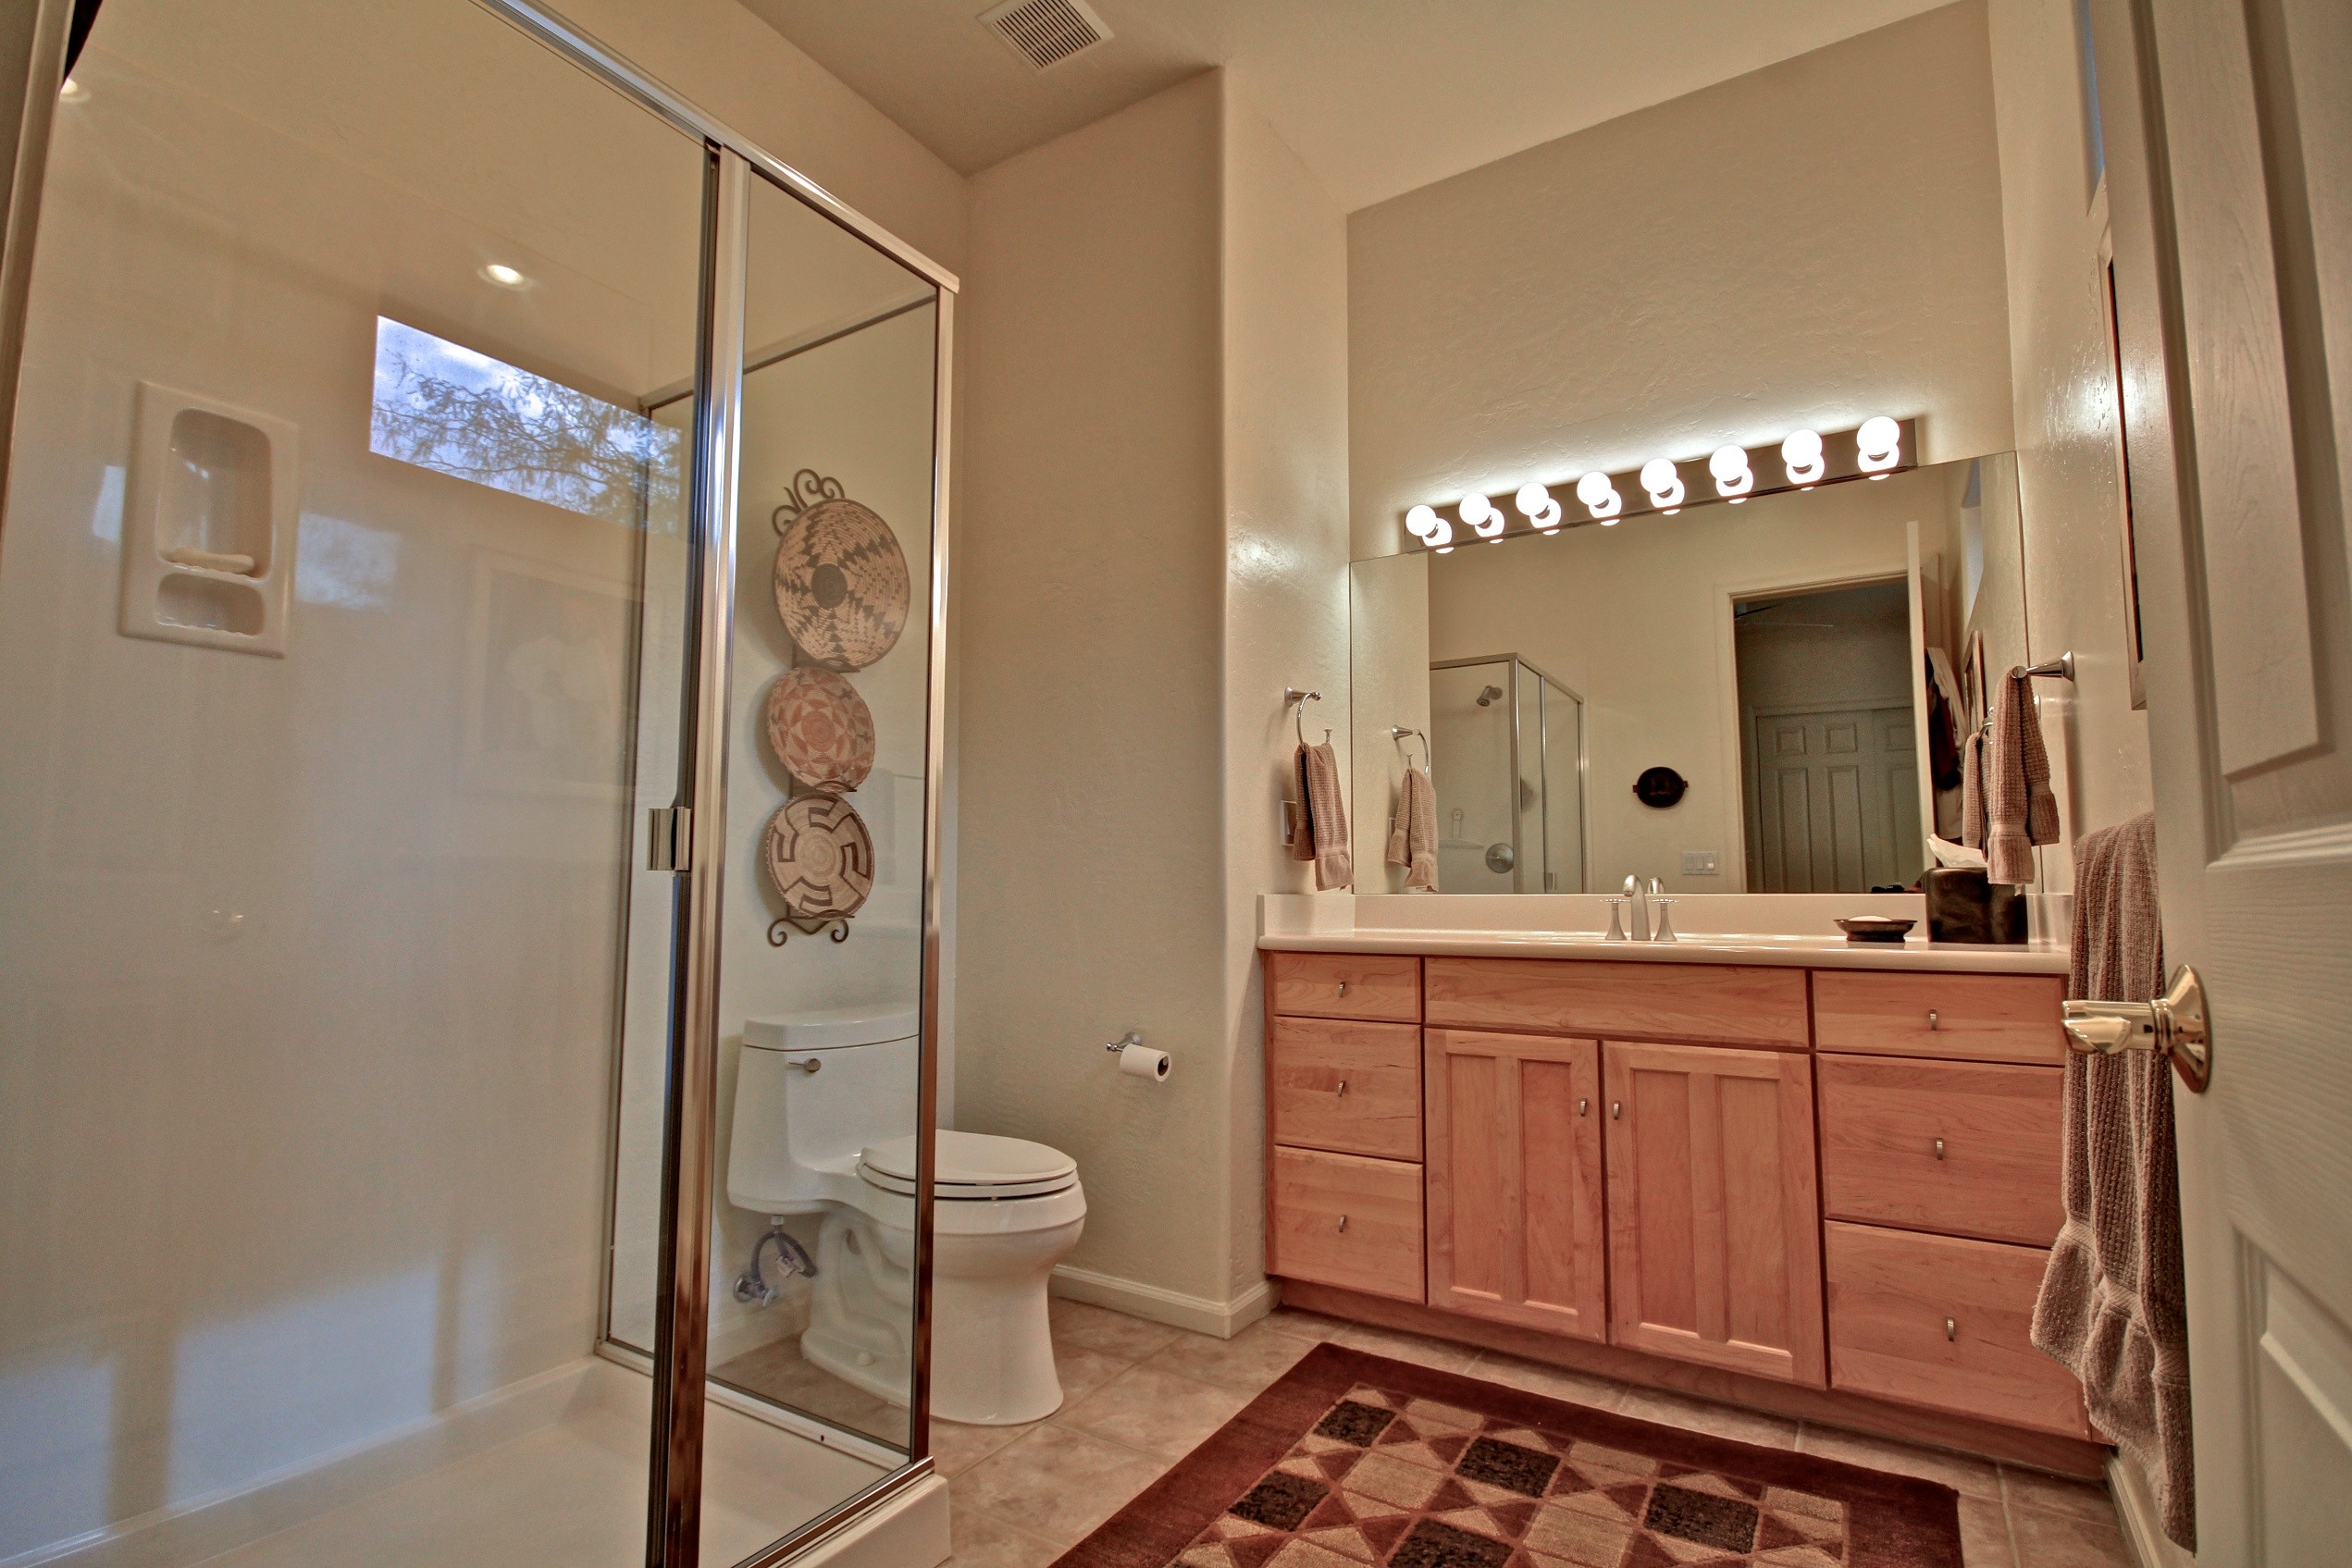 Ensuite guest bath at this Scottsdale home for sale in DC Ranch located at 20534 N 95th St Scottsdale, AZ 85255 listed by Don Matheson at The Matheson Team